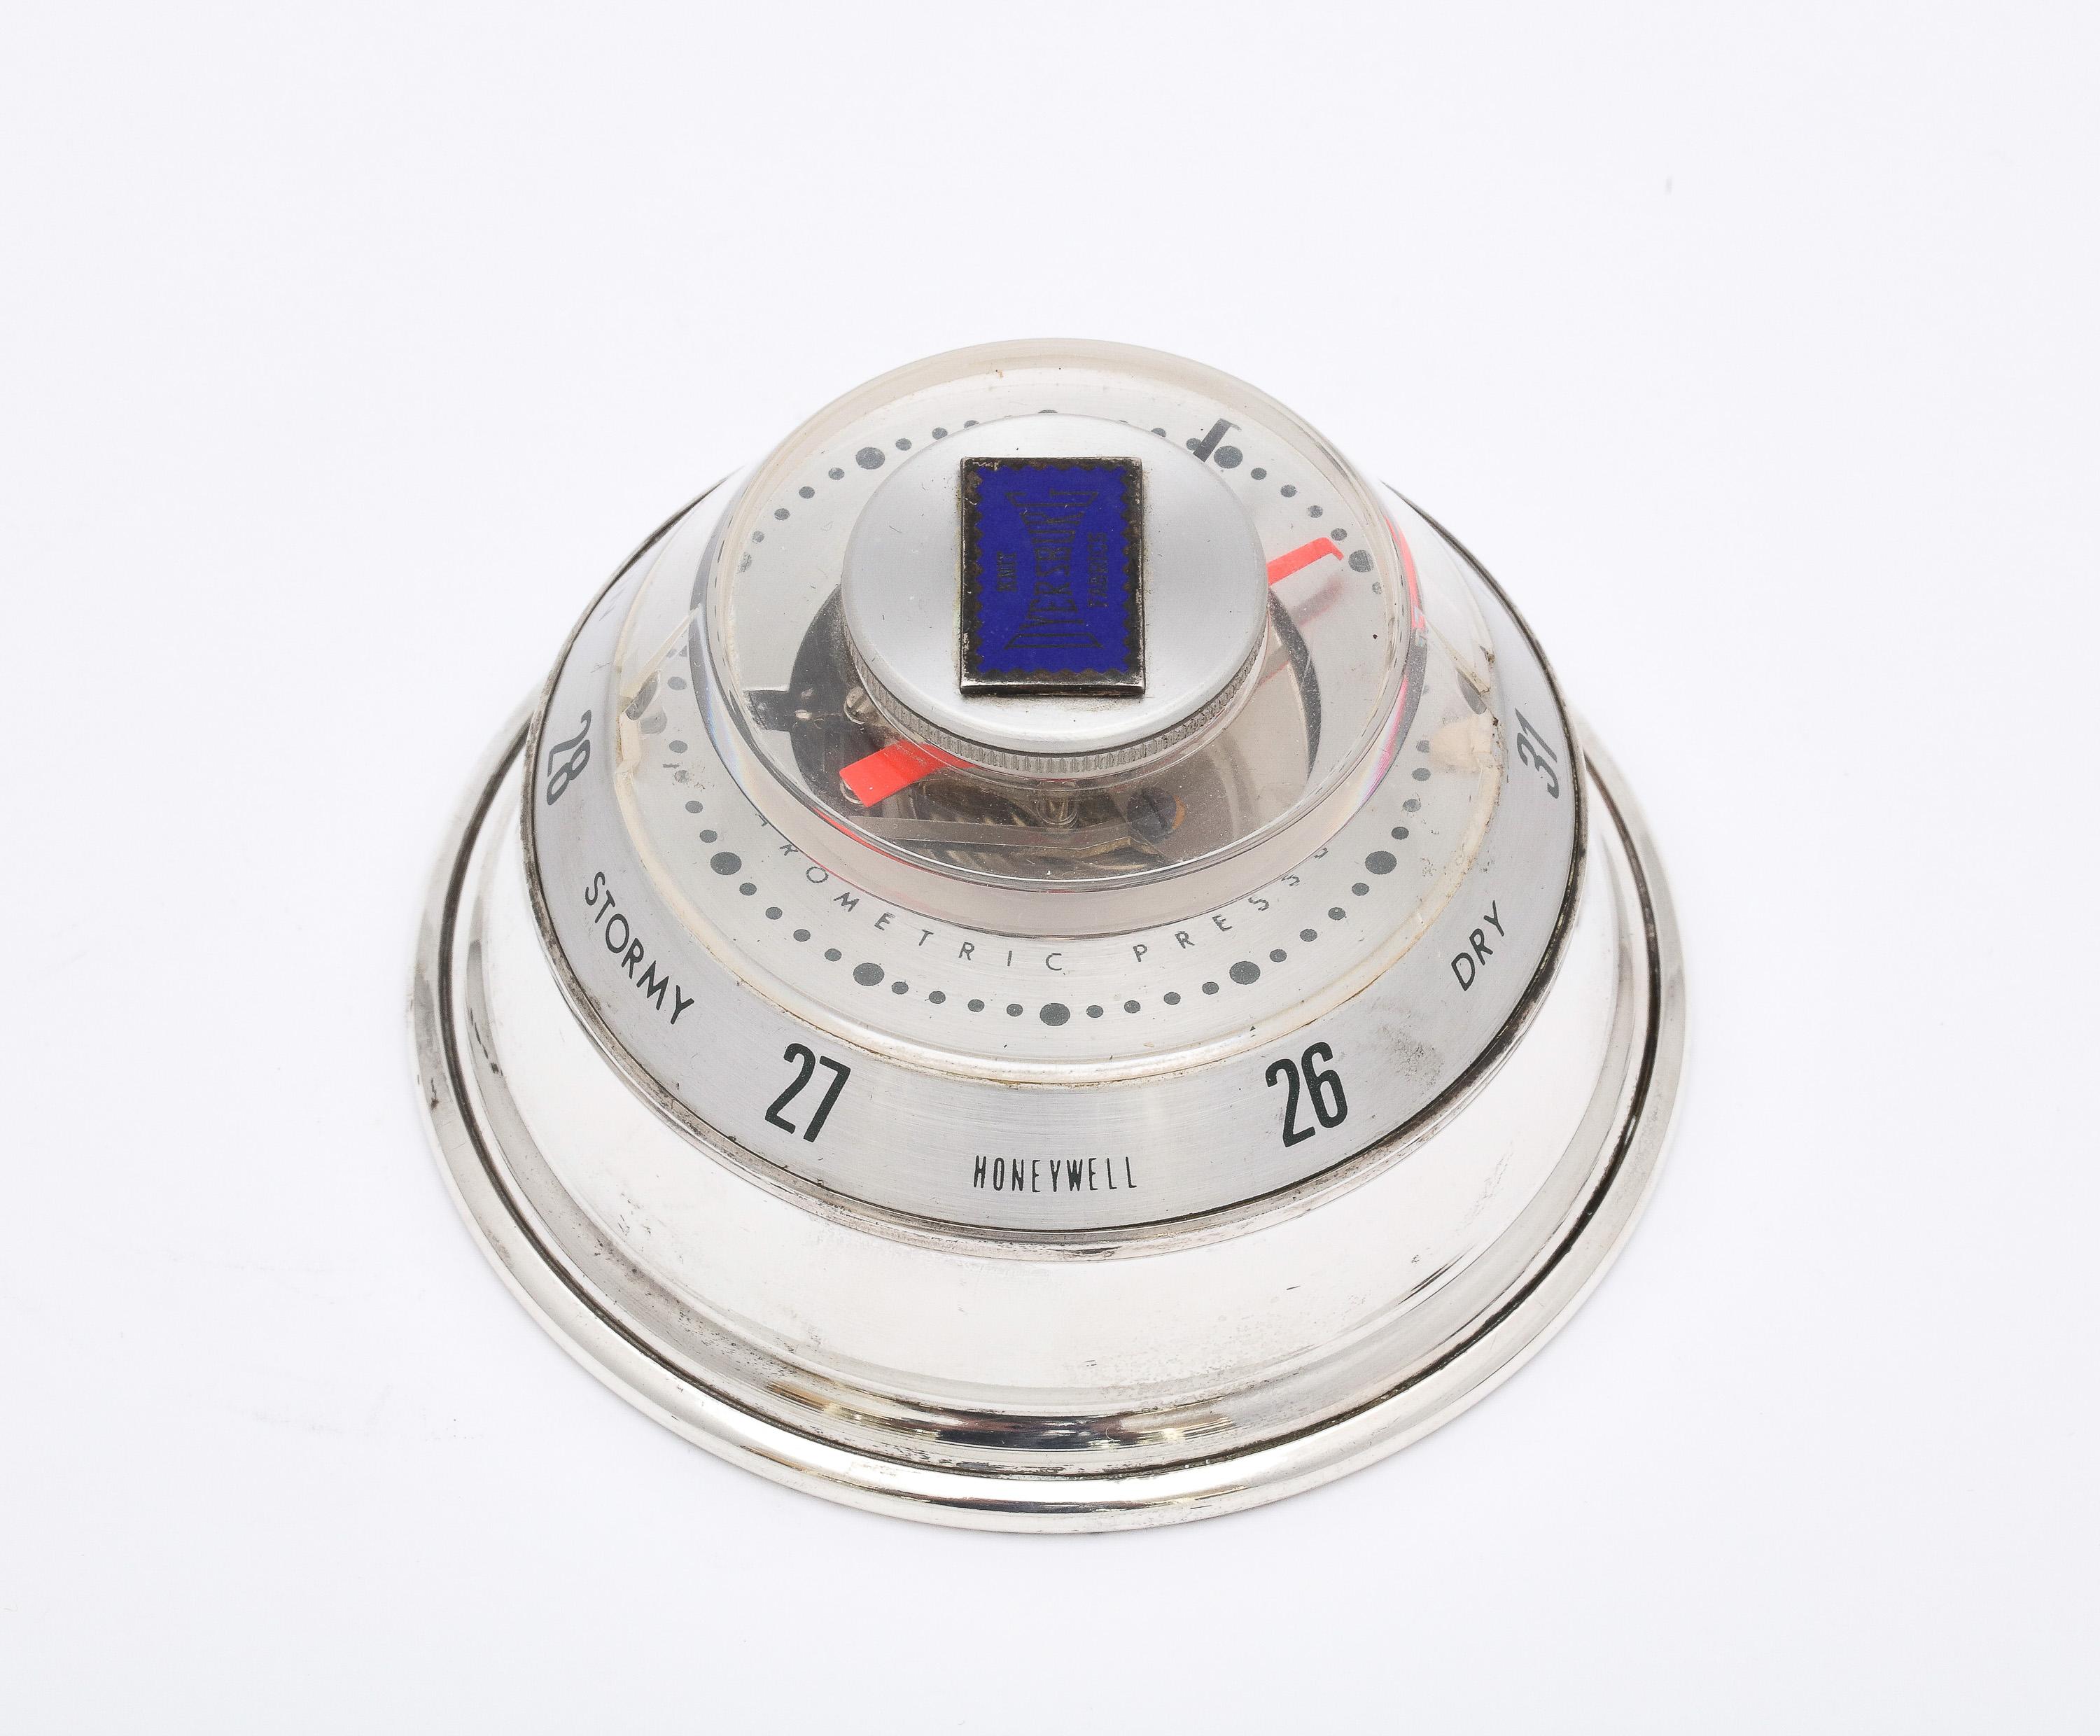 Mid-Century Modern, sterling silver-mounted Honeywell barometer, Baldwin and Miller Co., Indianapolis, Indiana, Ca. 1950's. Barometer mechanism itself is made by the Honeywell Company. Made as a souvenir of the Everlast Knit Fabric Company. Measures